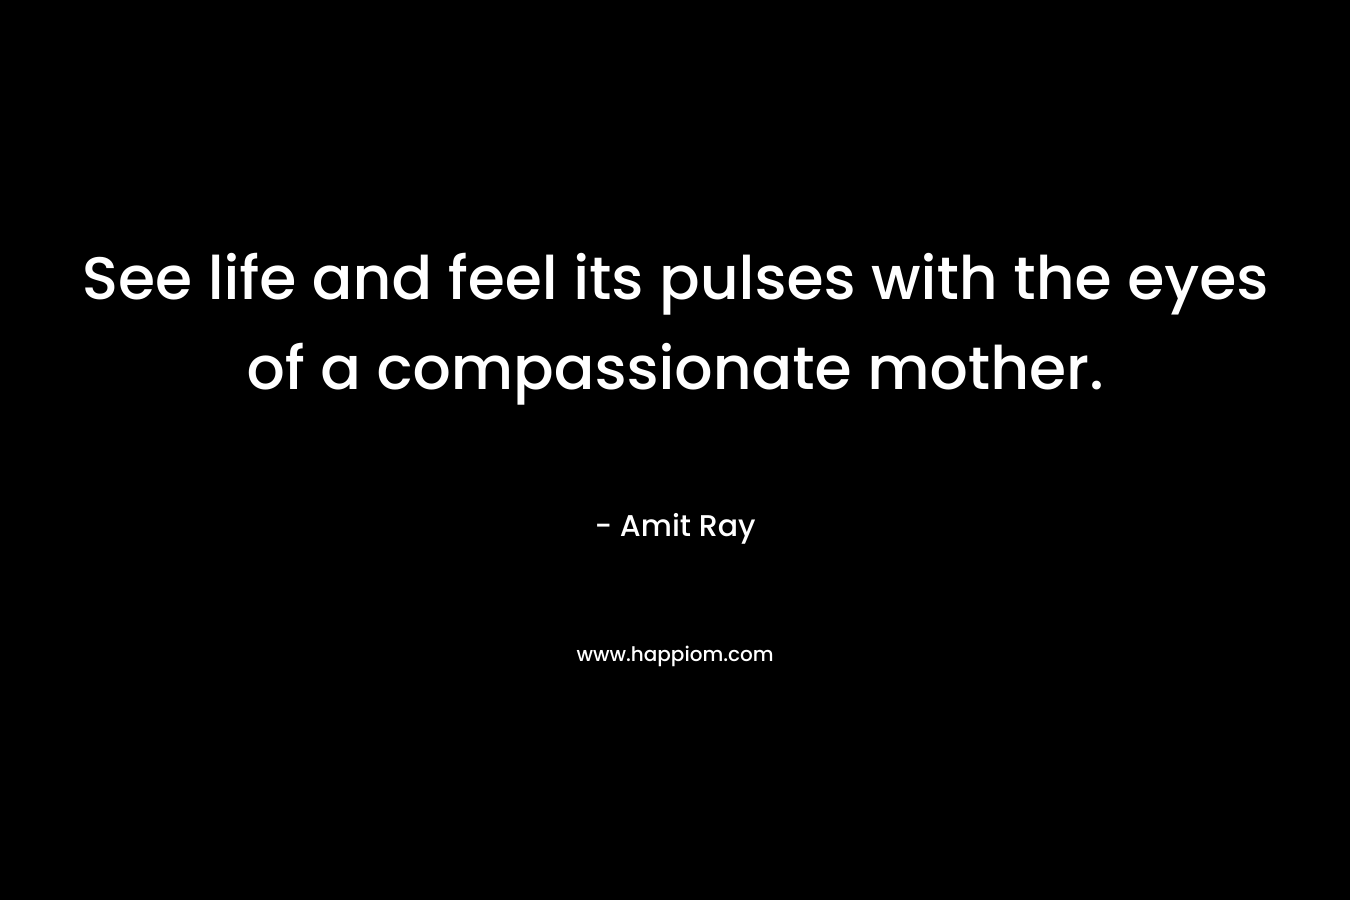 See life and feel its pulses with the eyes of a compassionate mother.